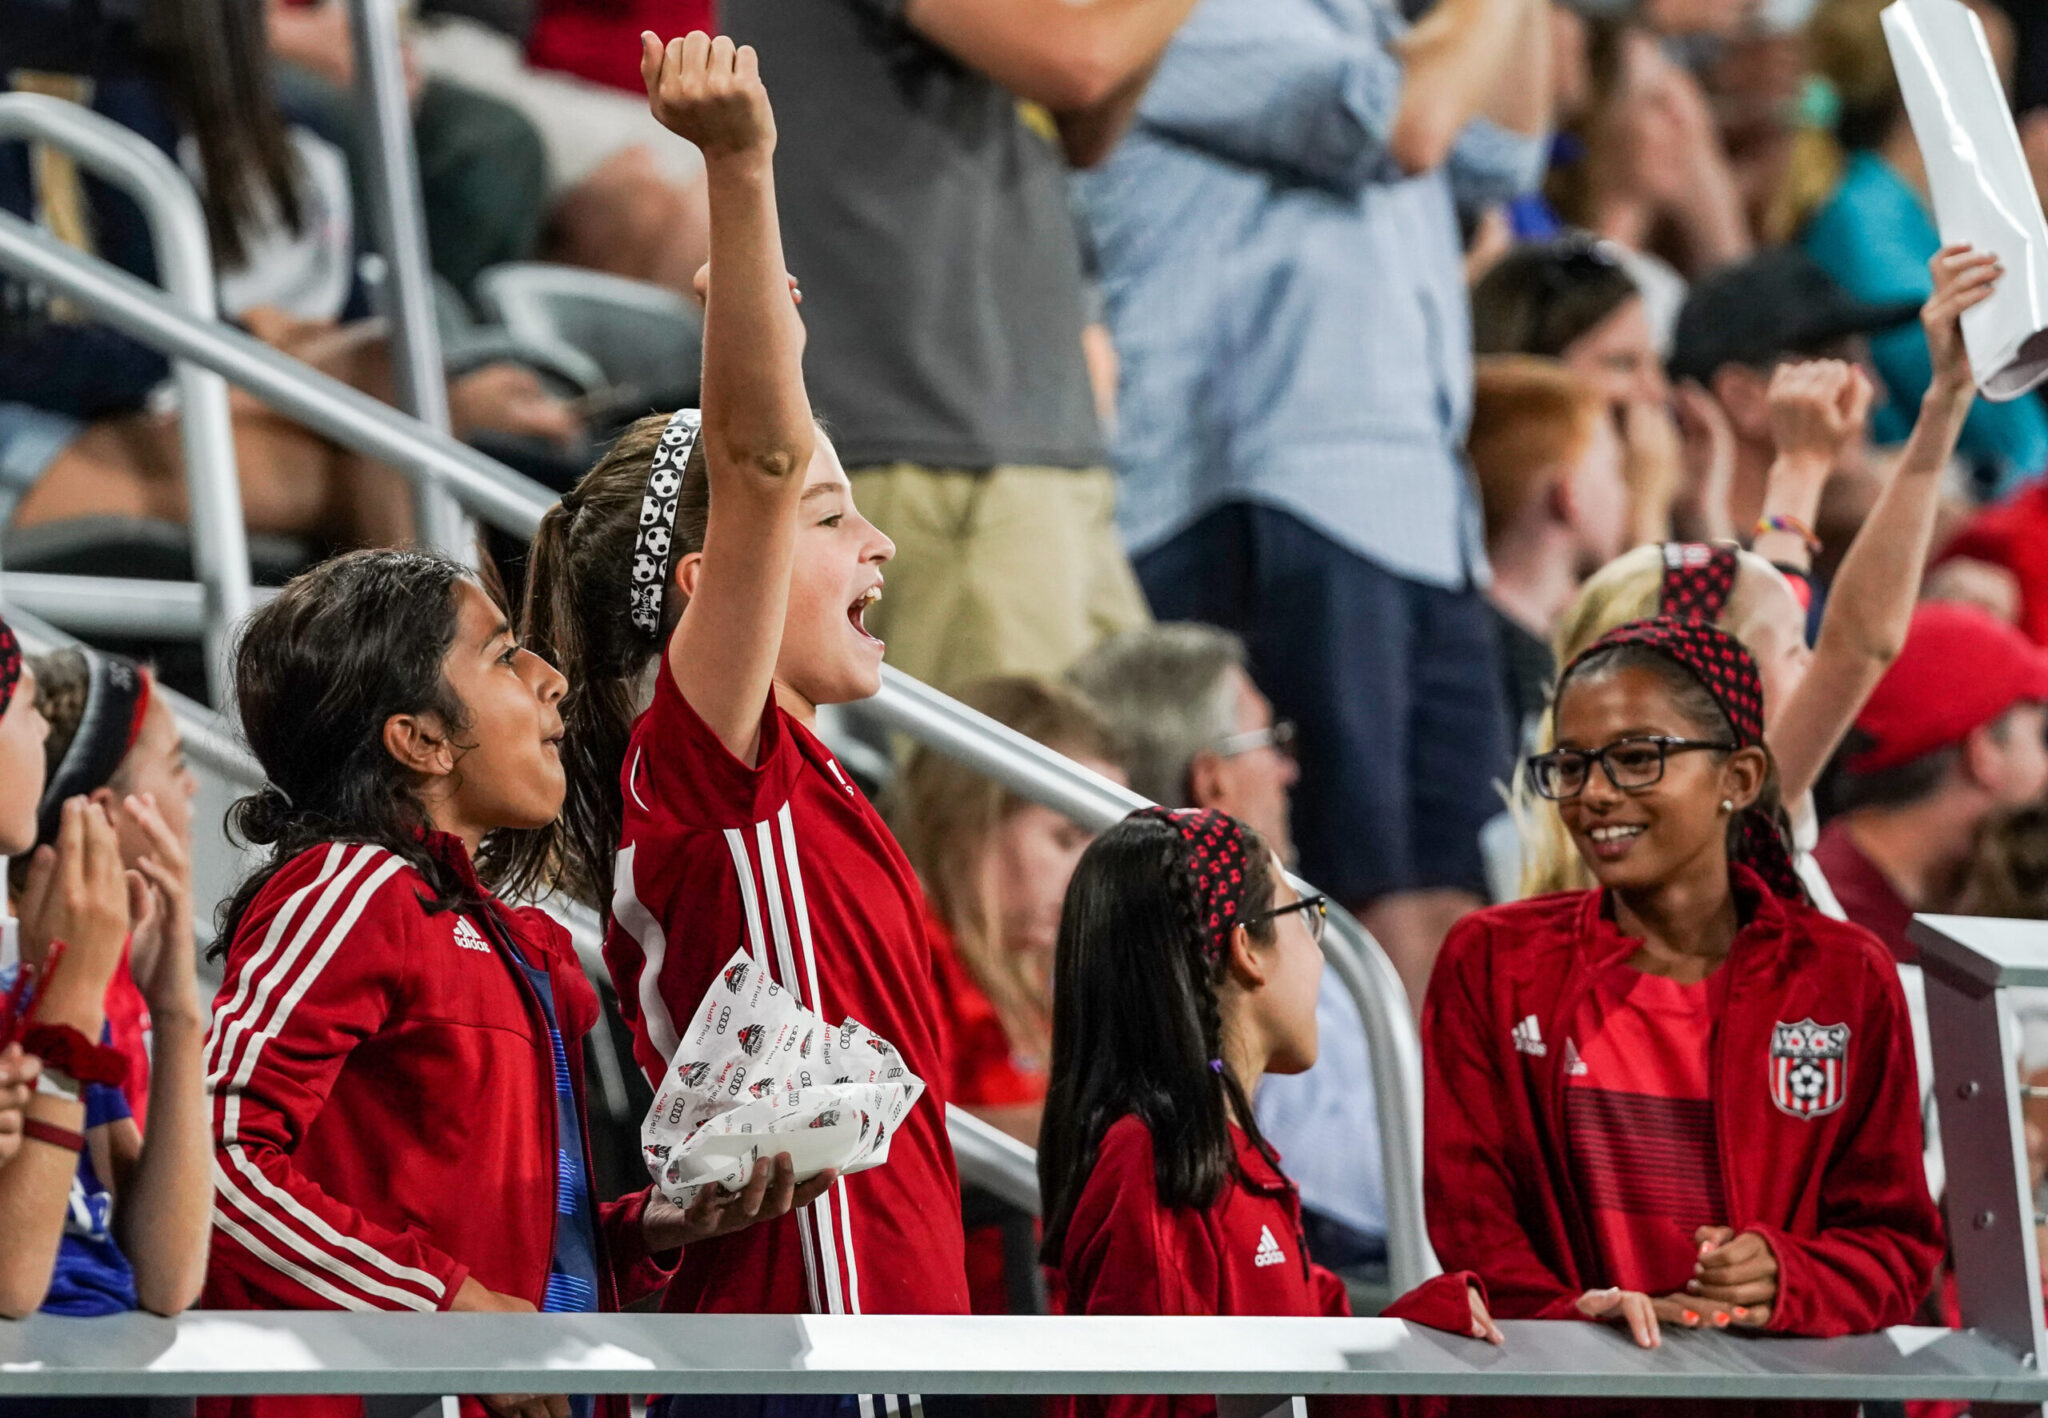 Spirit passing out rally towels, thundersticks, more at Audi Field Featured Image